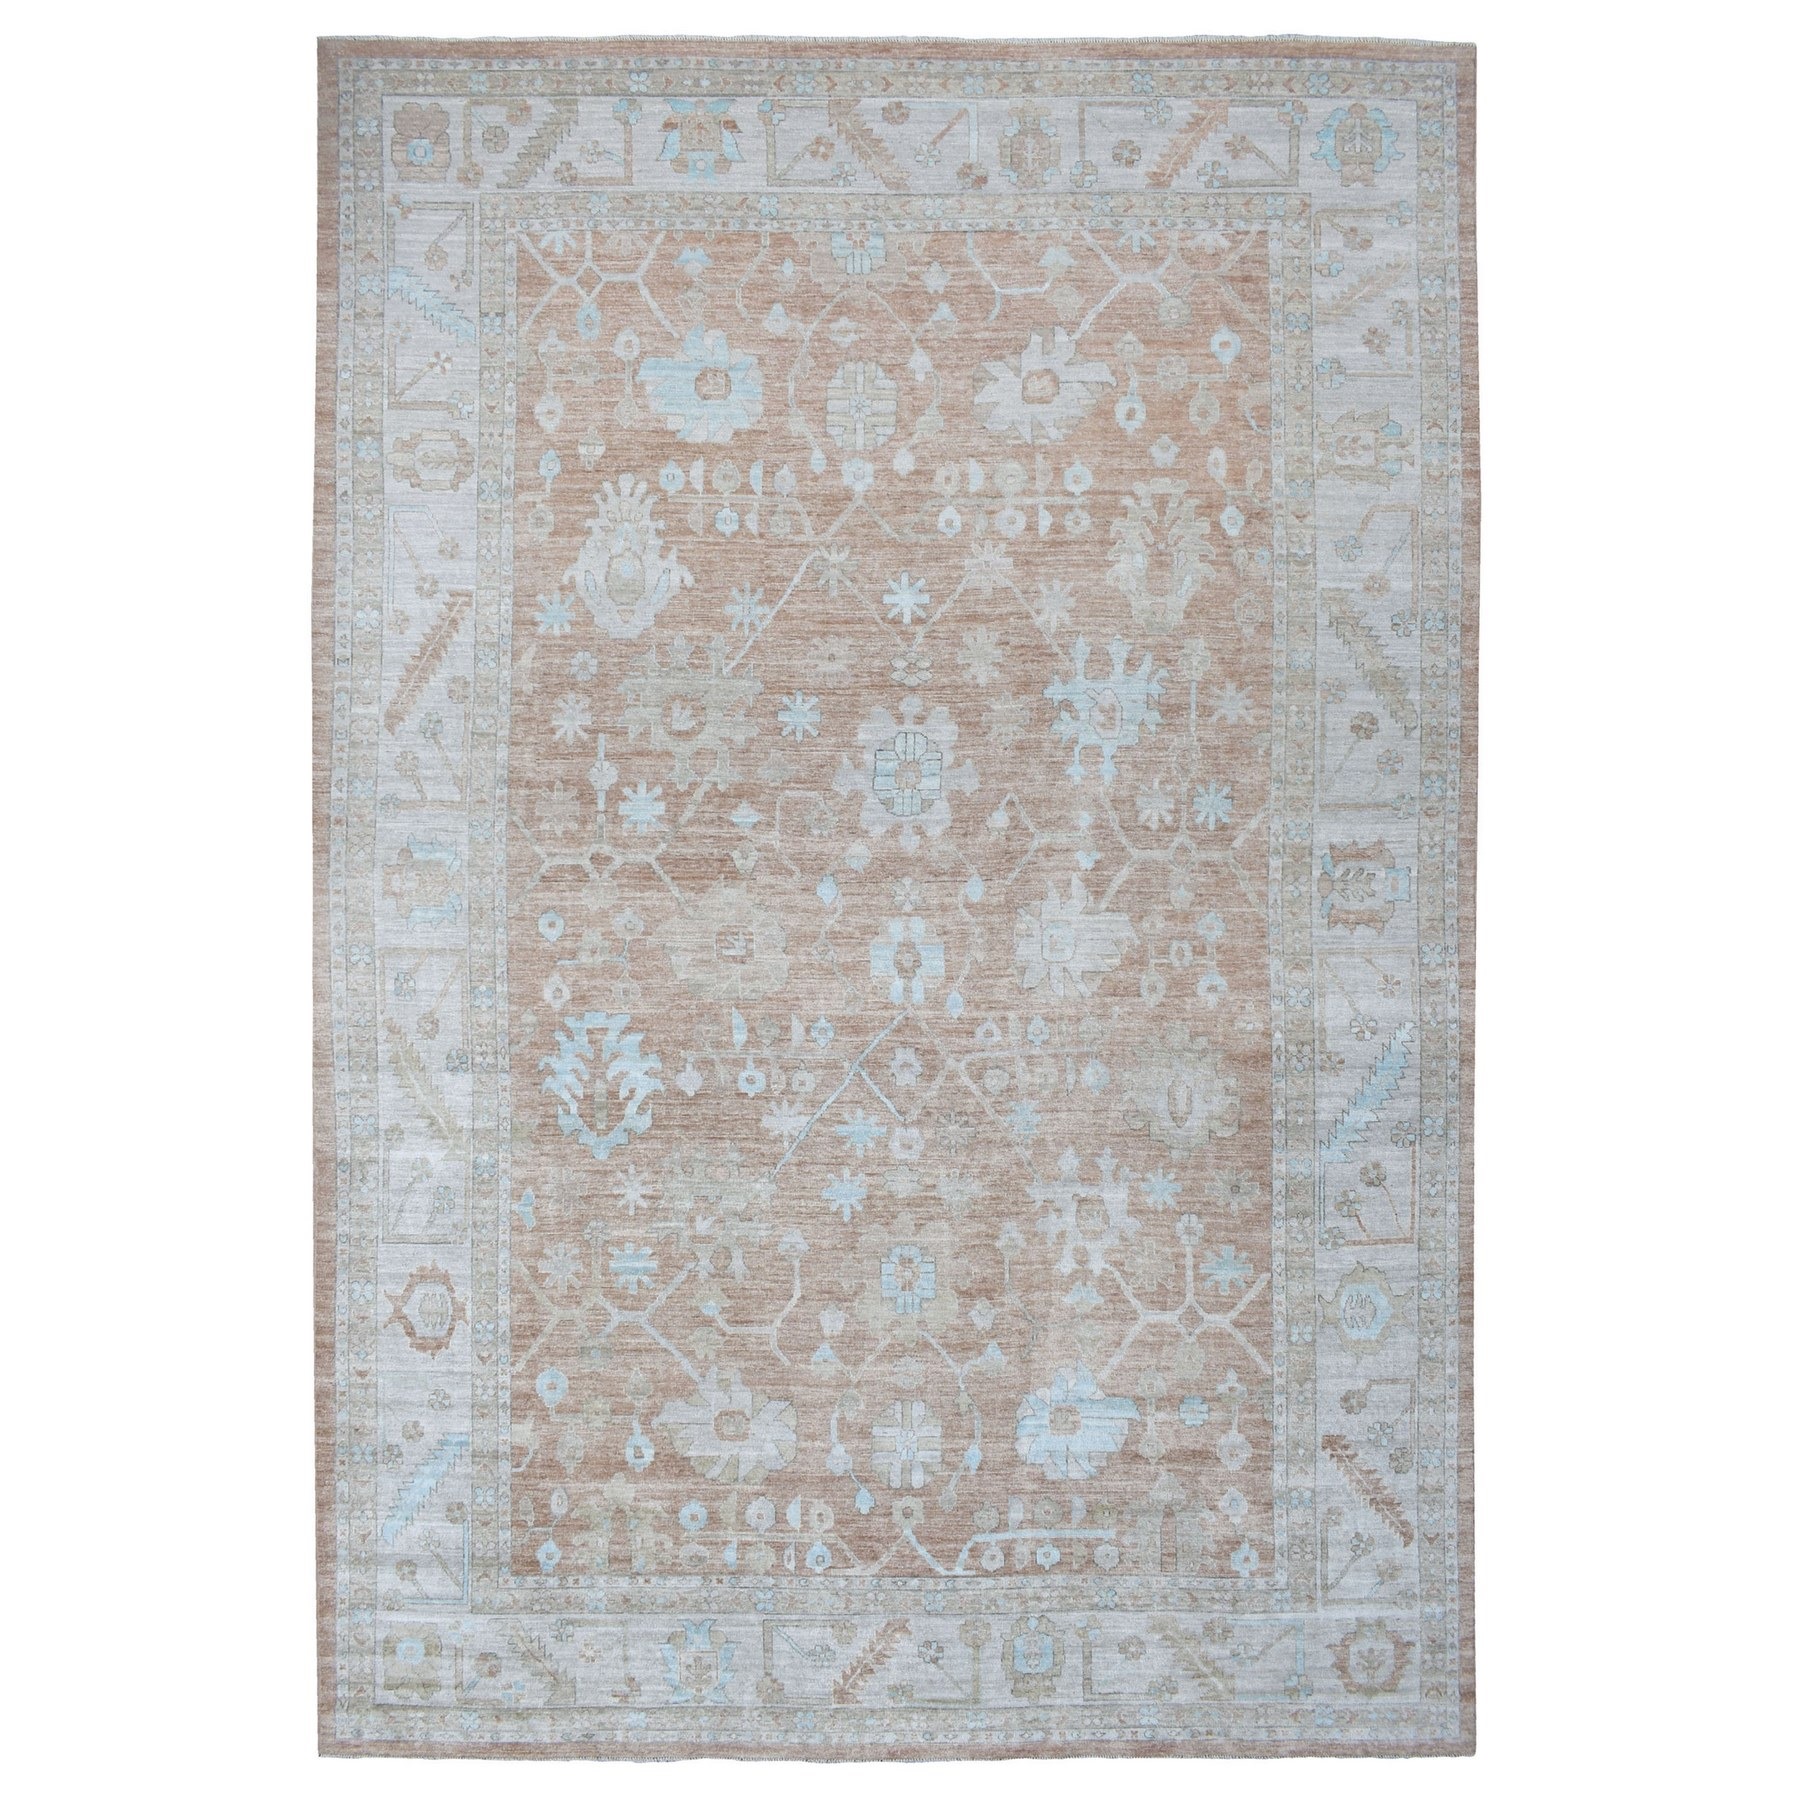 Agra And Turkish Collection Hand Knotted Brown Rug No: 1135336